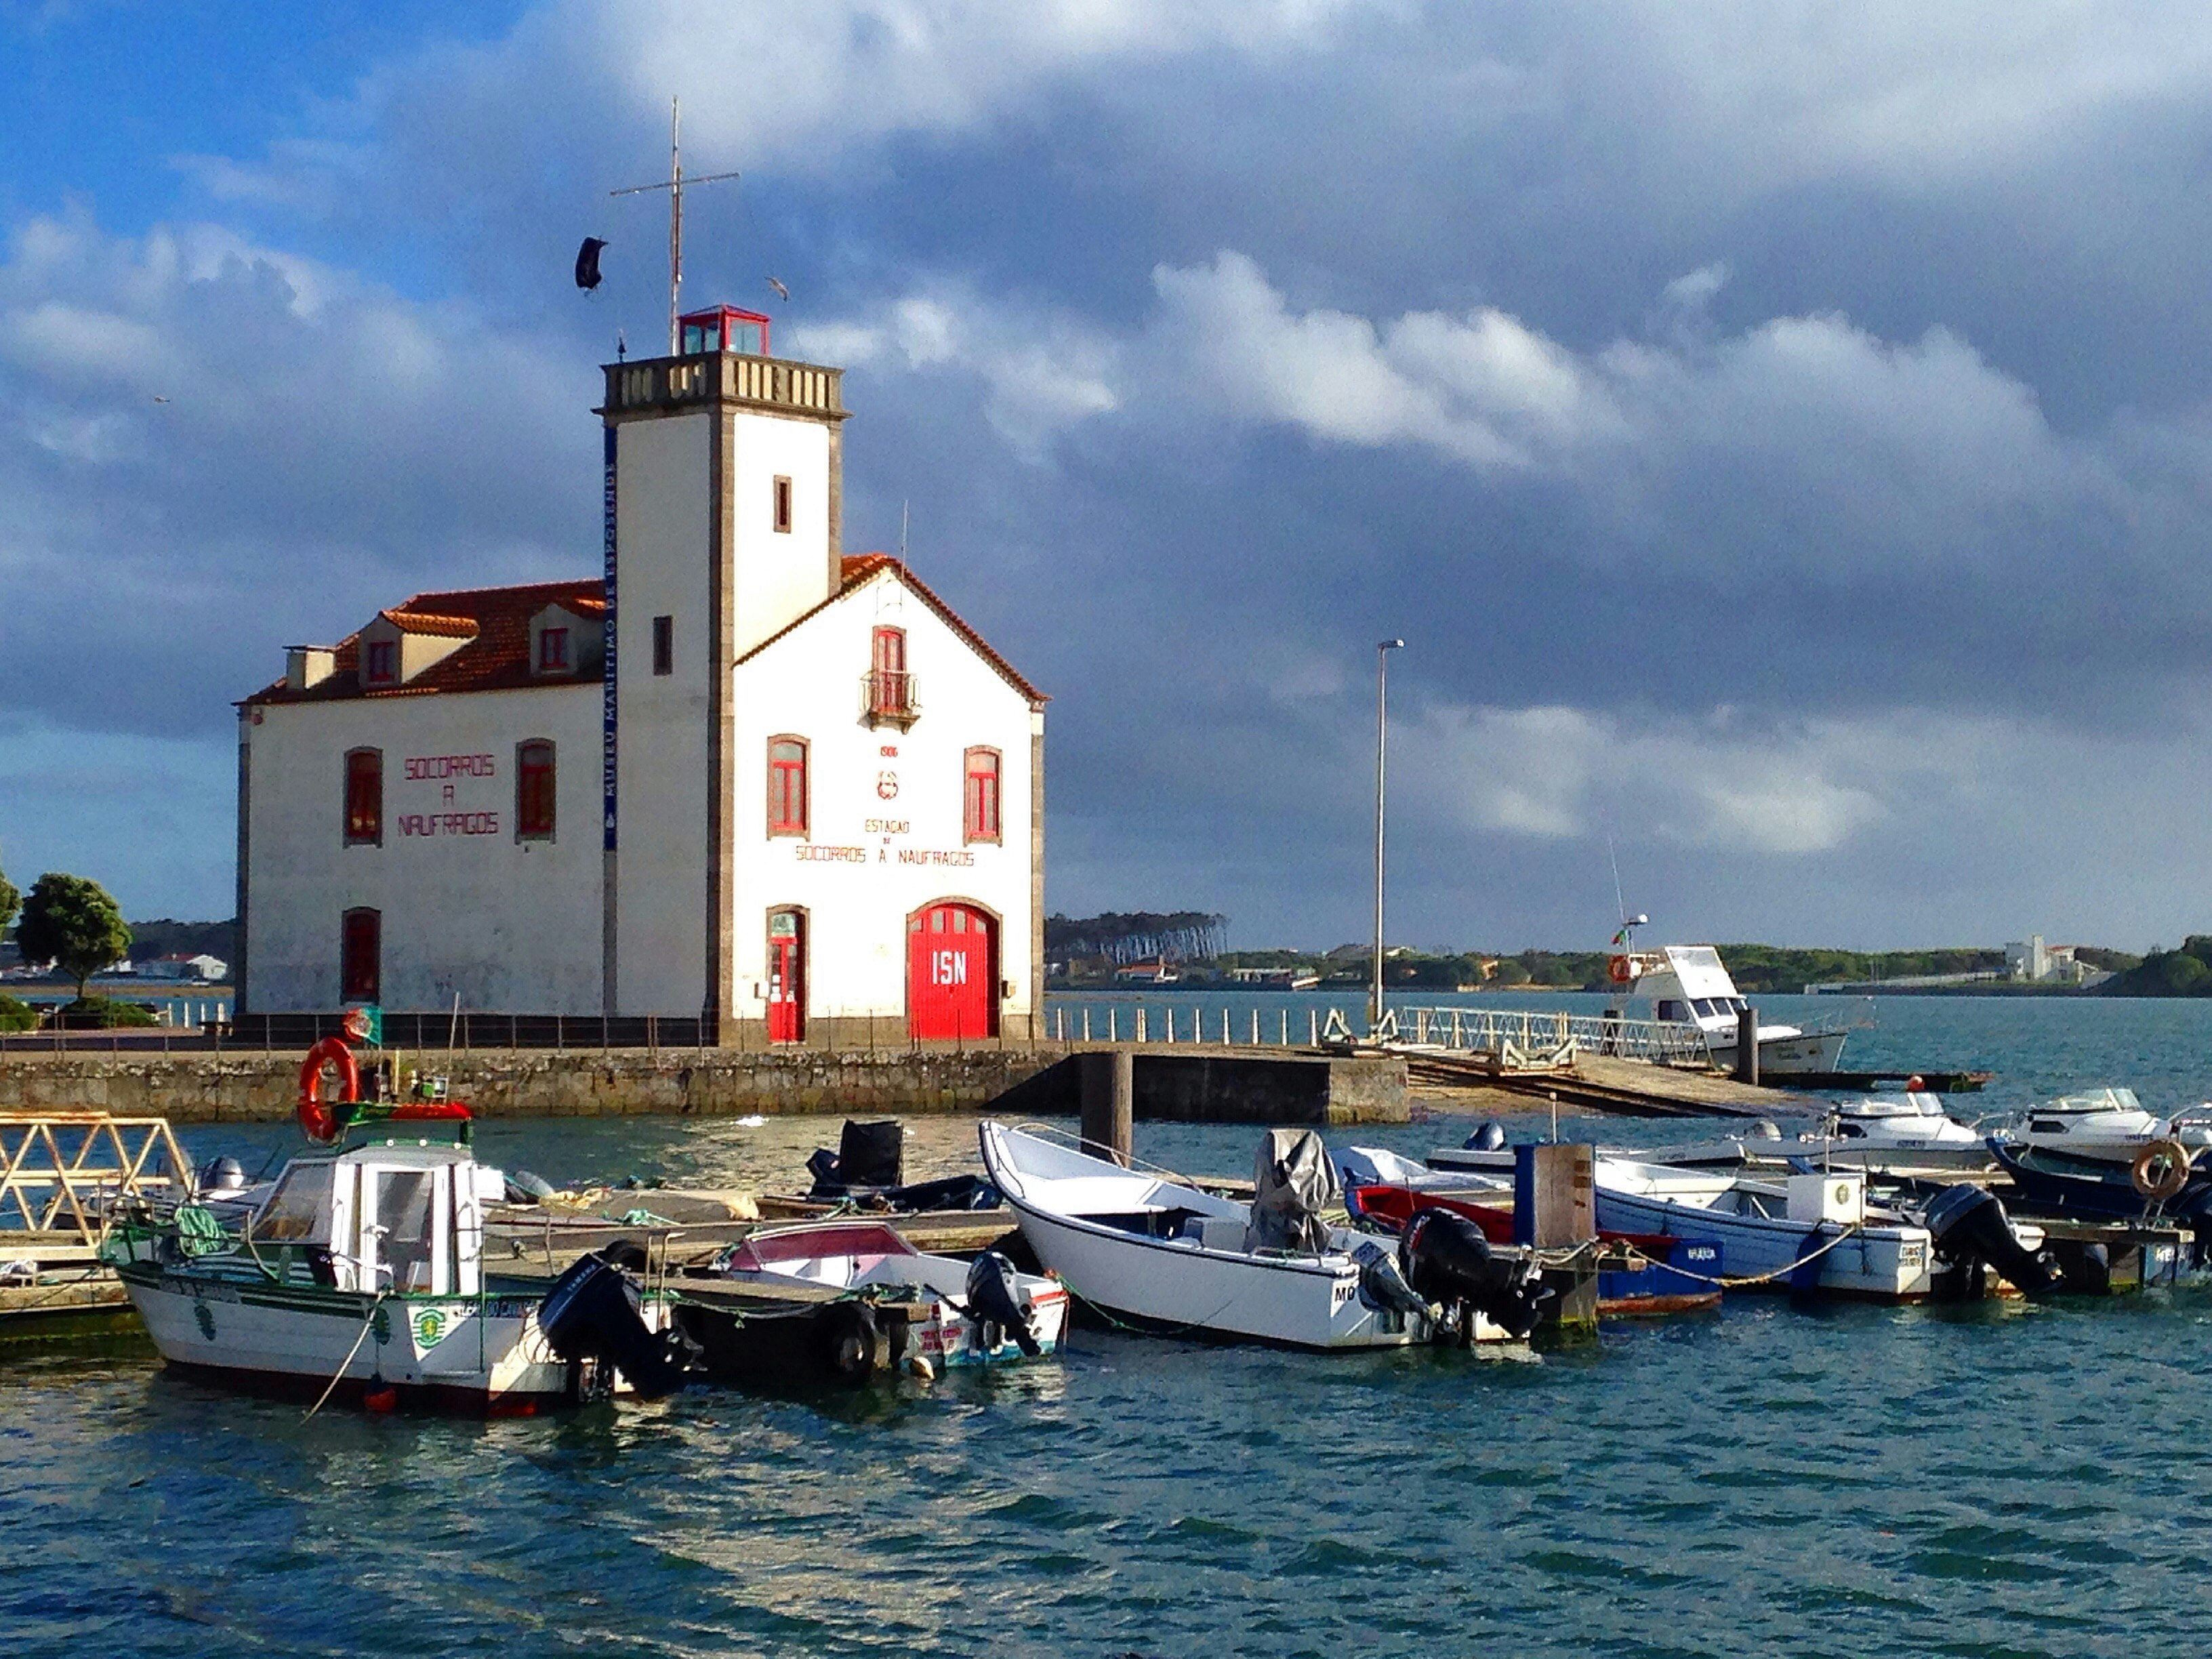 A simple white building with red-painted doors and windows stands at Esposende harbour on the Camino Portugués de la Costa route. There are several small boats bobbing on the water.